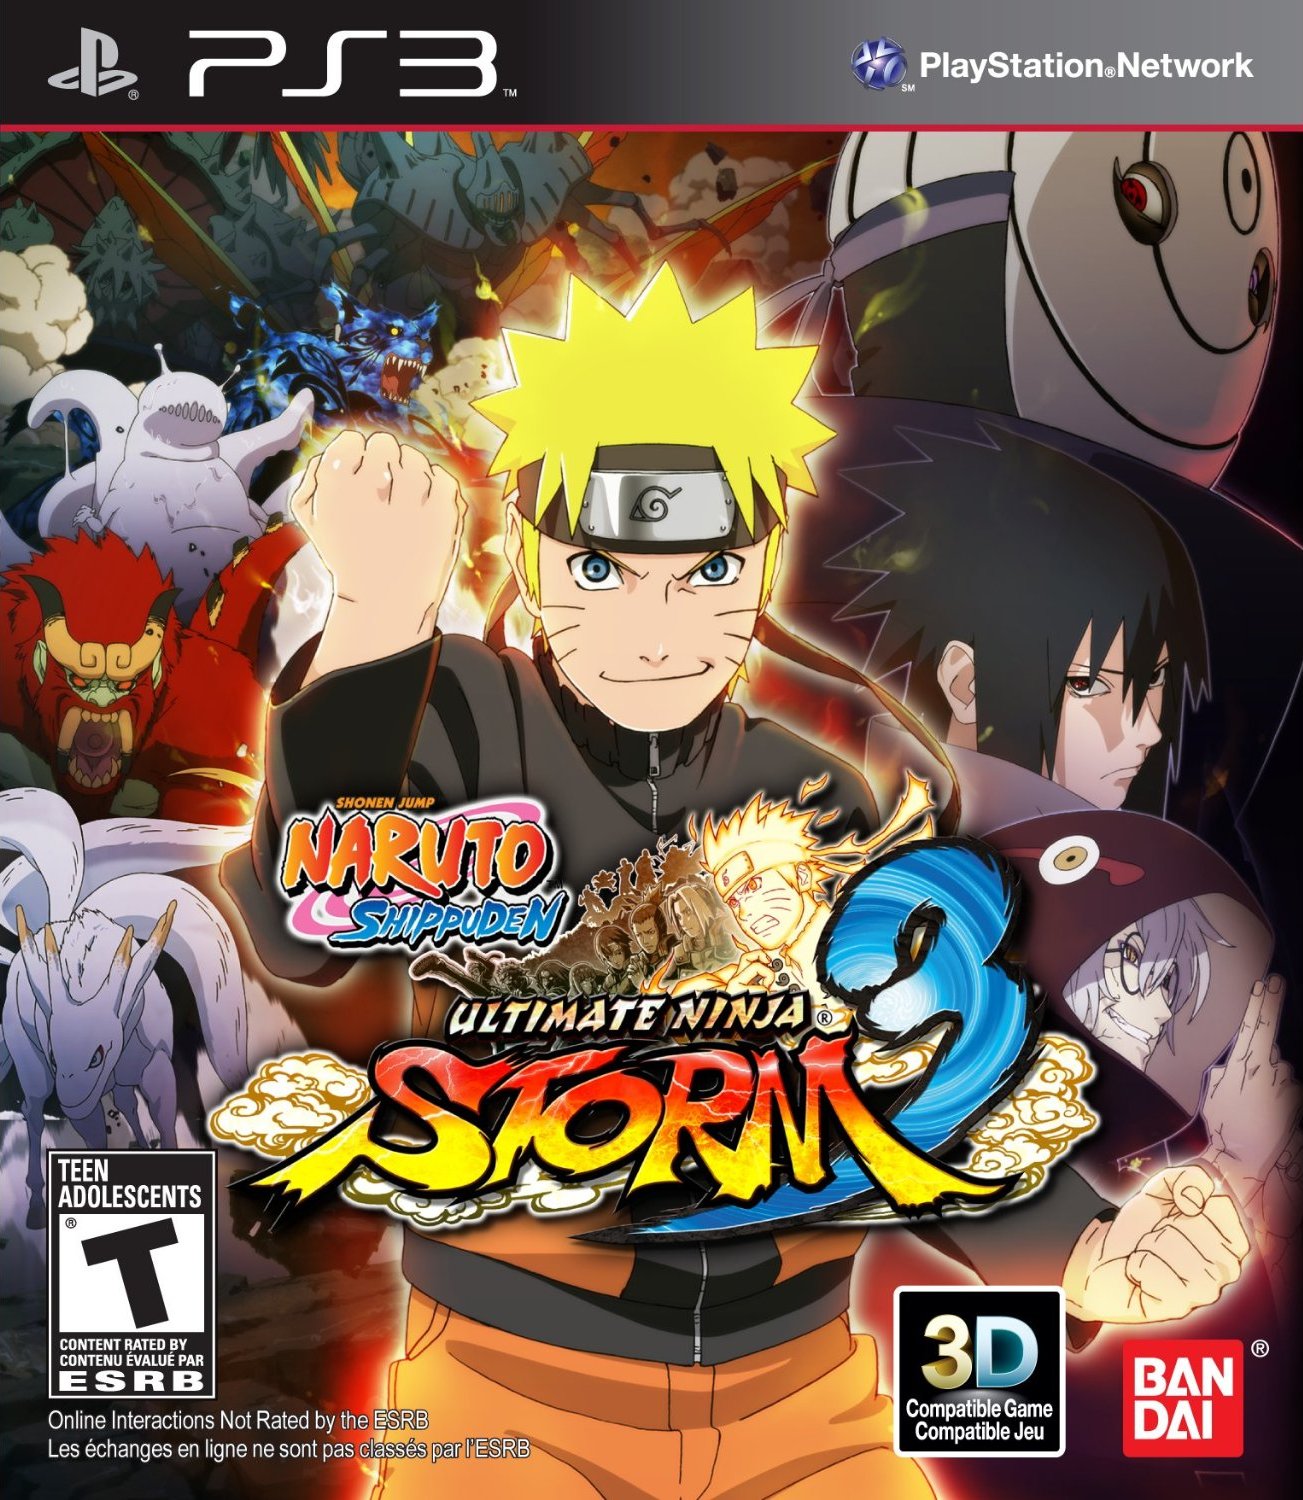 naruto shippuden storm 4 characters guide